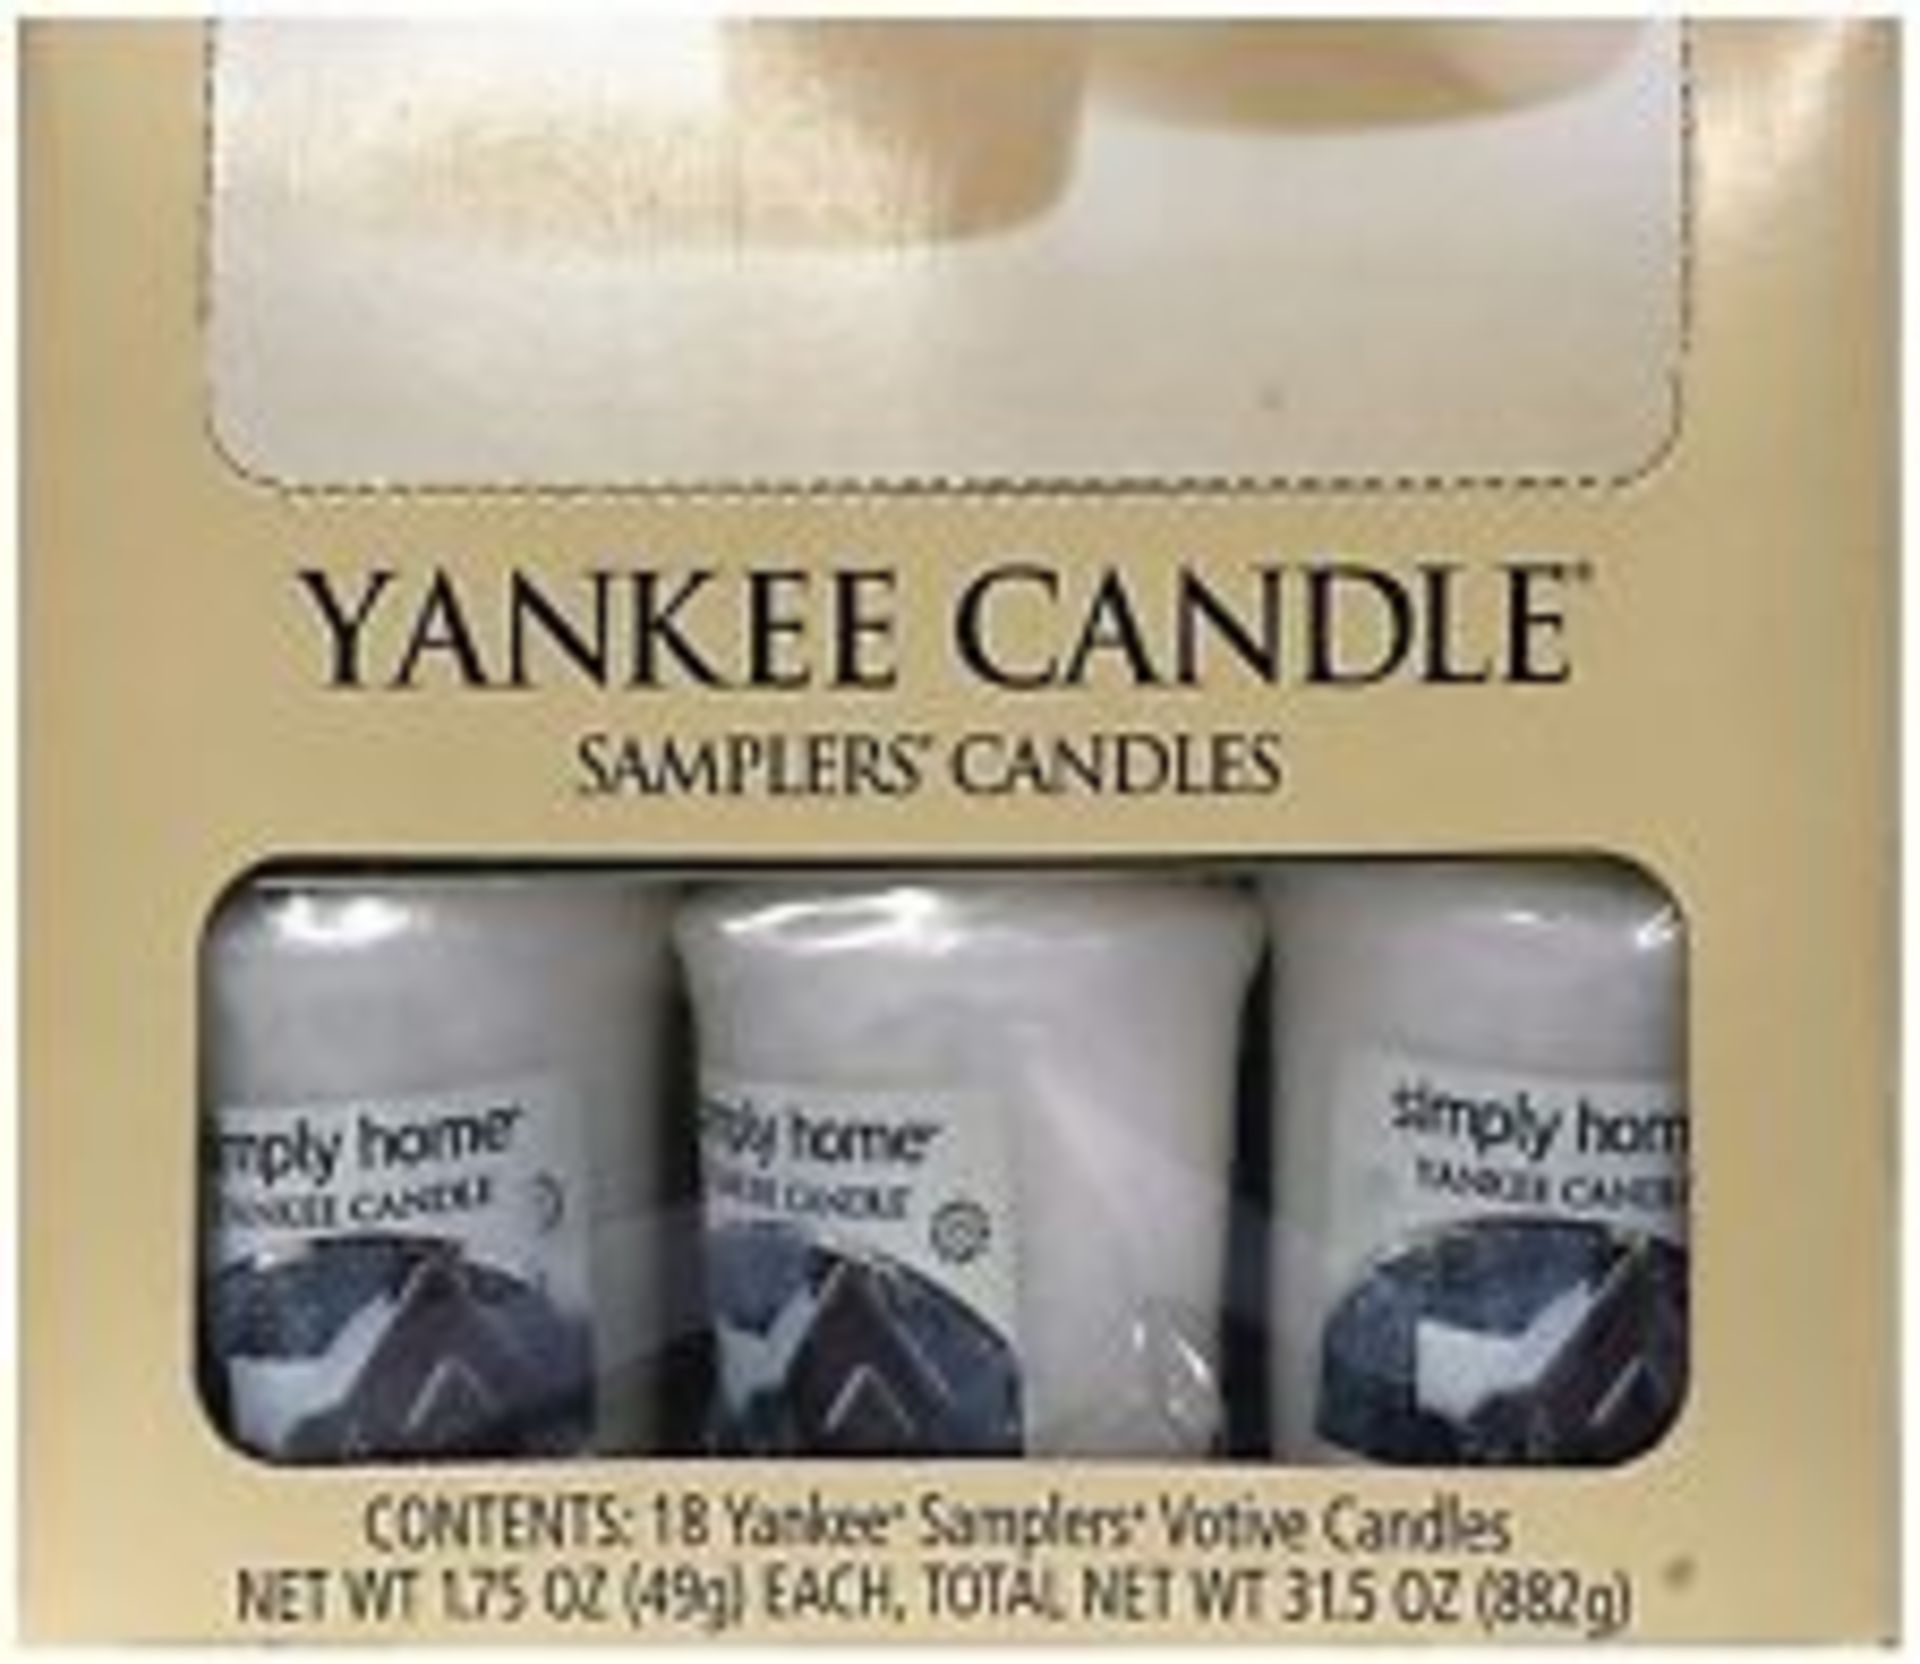 V Brand New 18 x Yankee Candle Frosted Snow 49g eBaY Price£27.00 X 2 YOUR BID PRICE TO BE MULTIPLIED - Image 2 of 2